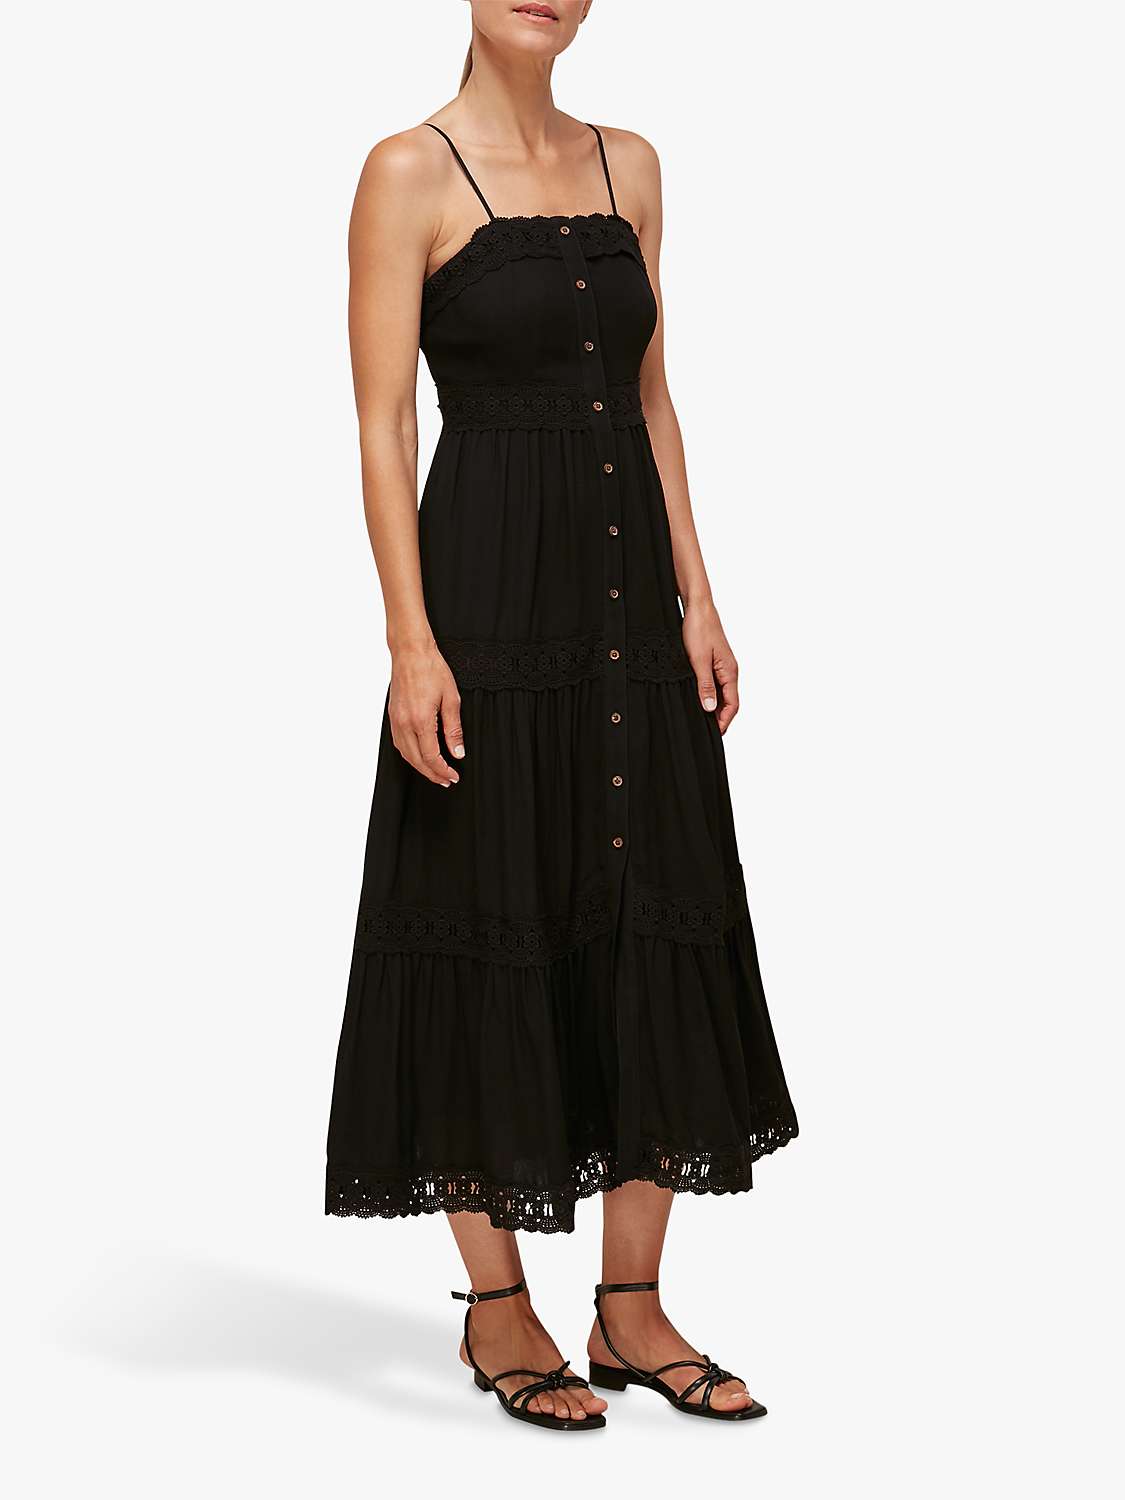 Whistles Strappy Lace Dress, Black at John Lewis & Partners